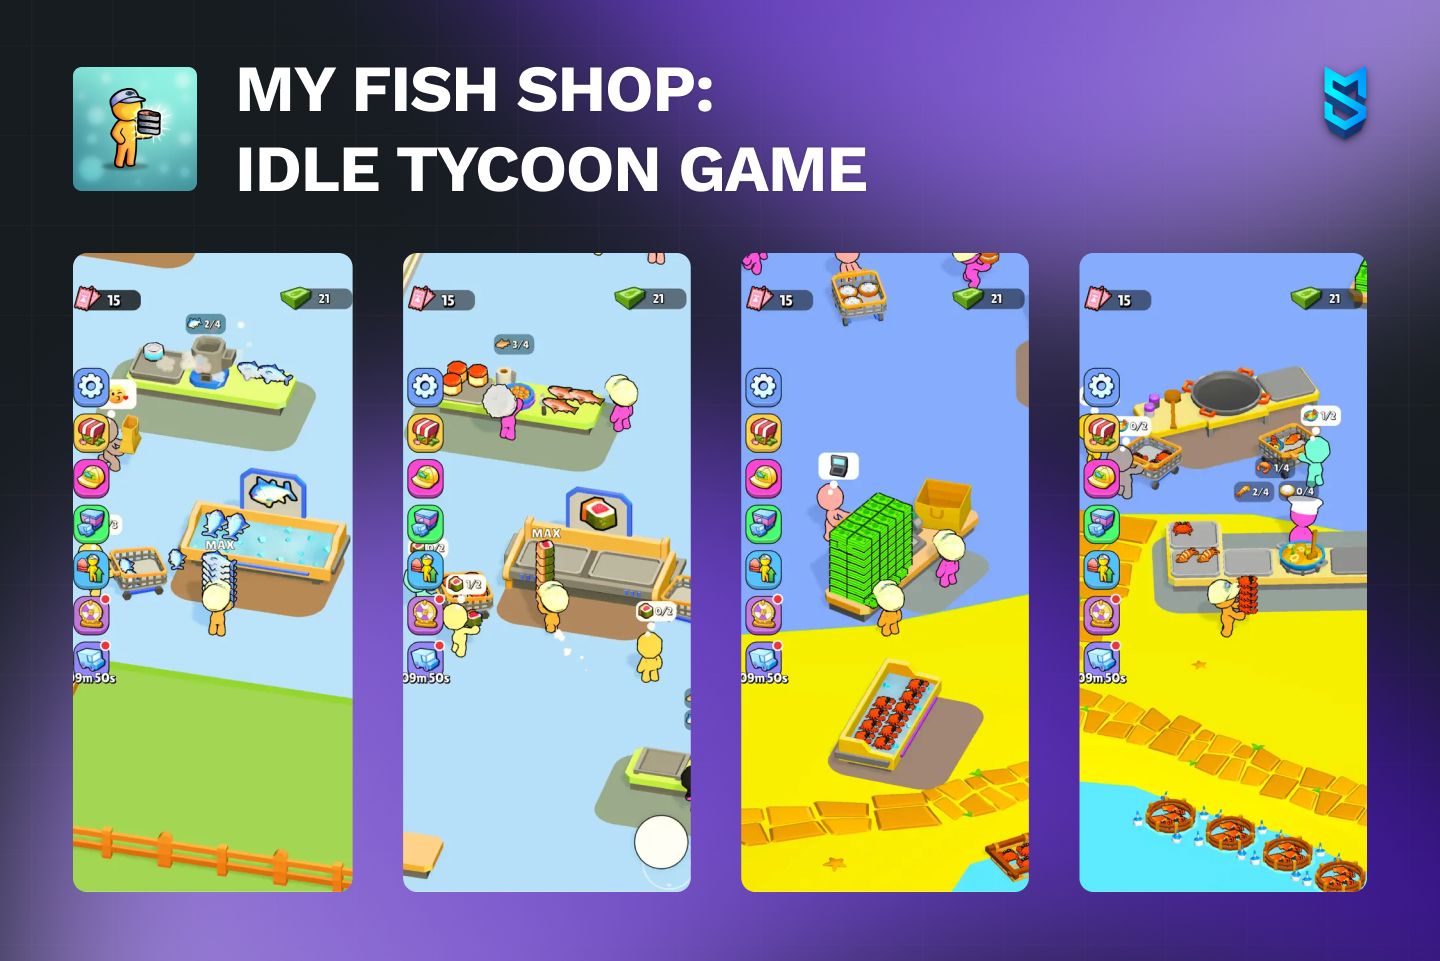 My Fish Shop: Idle Tycoon Game